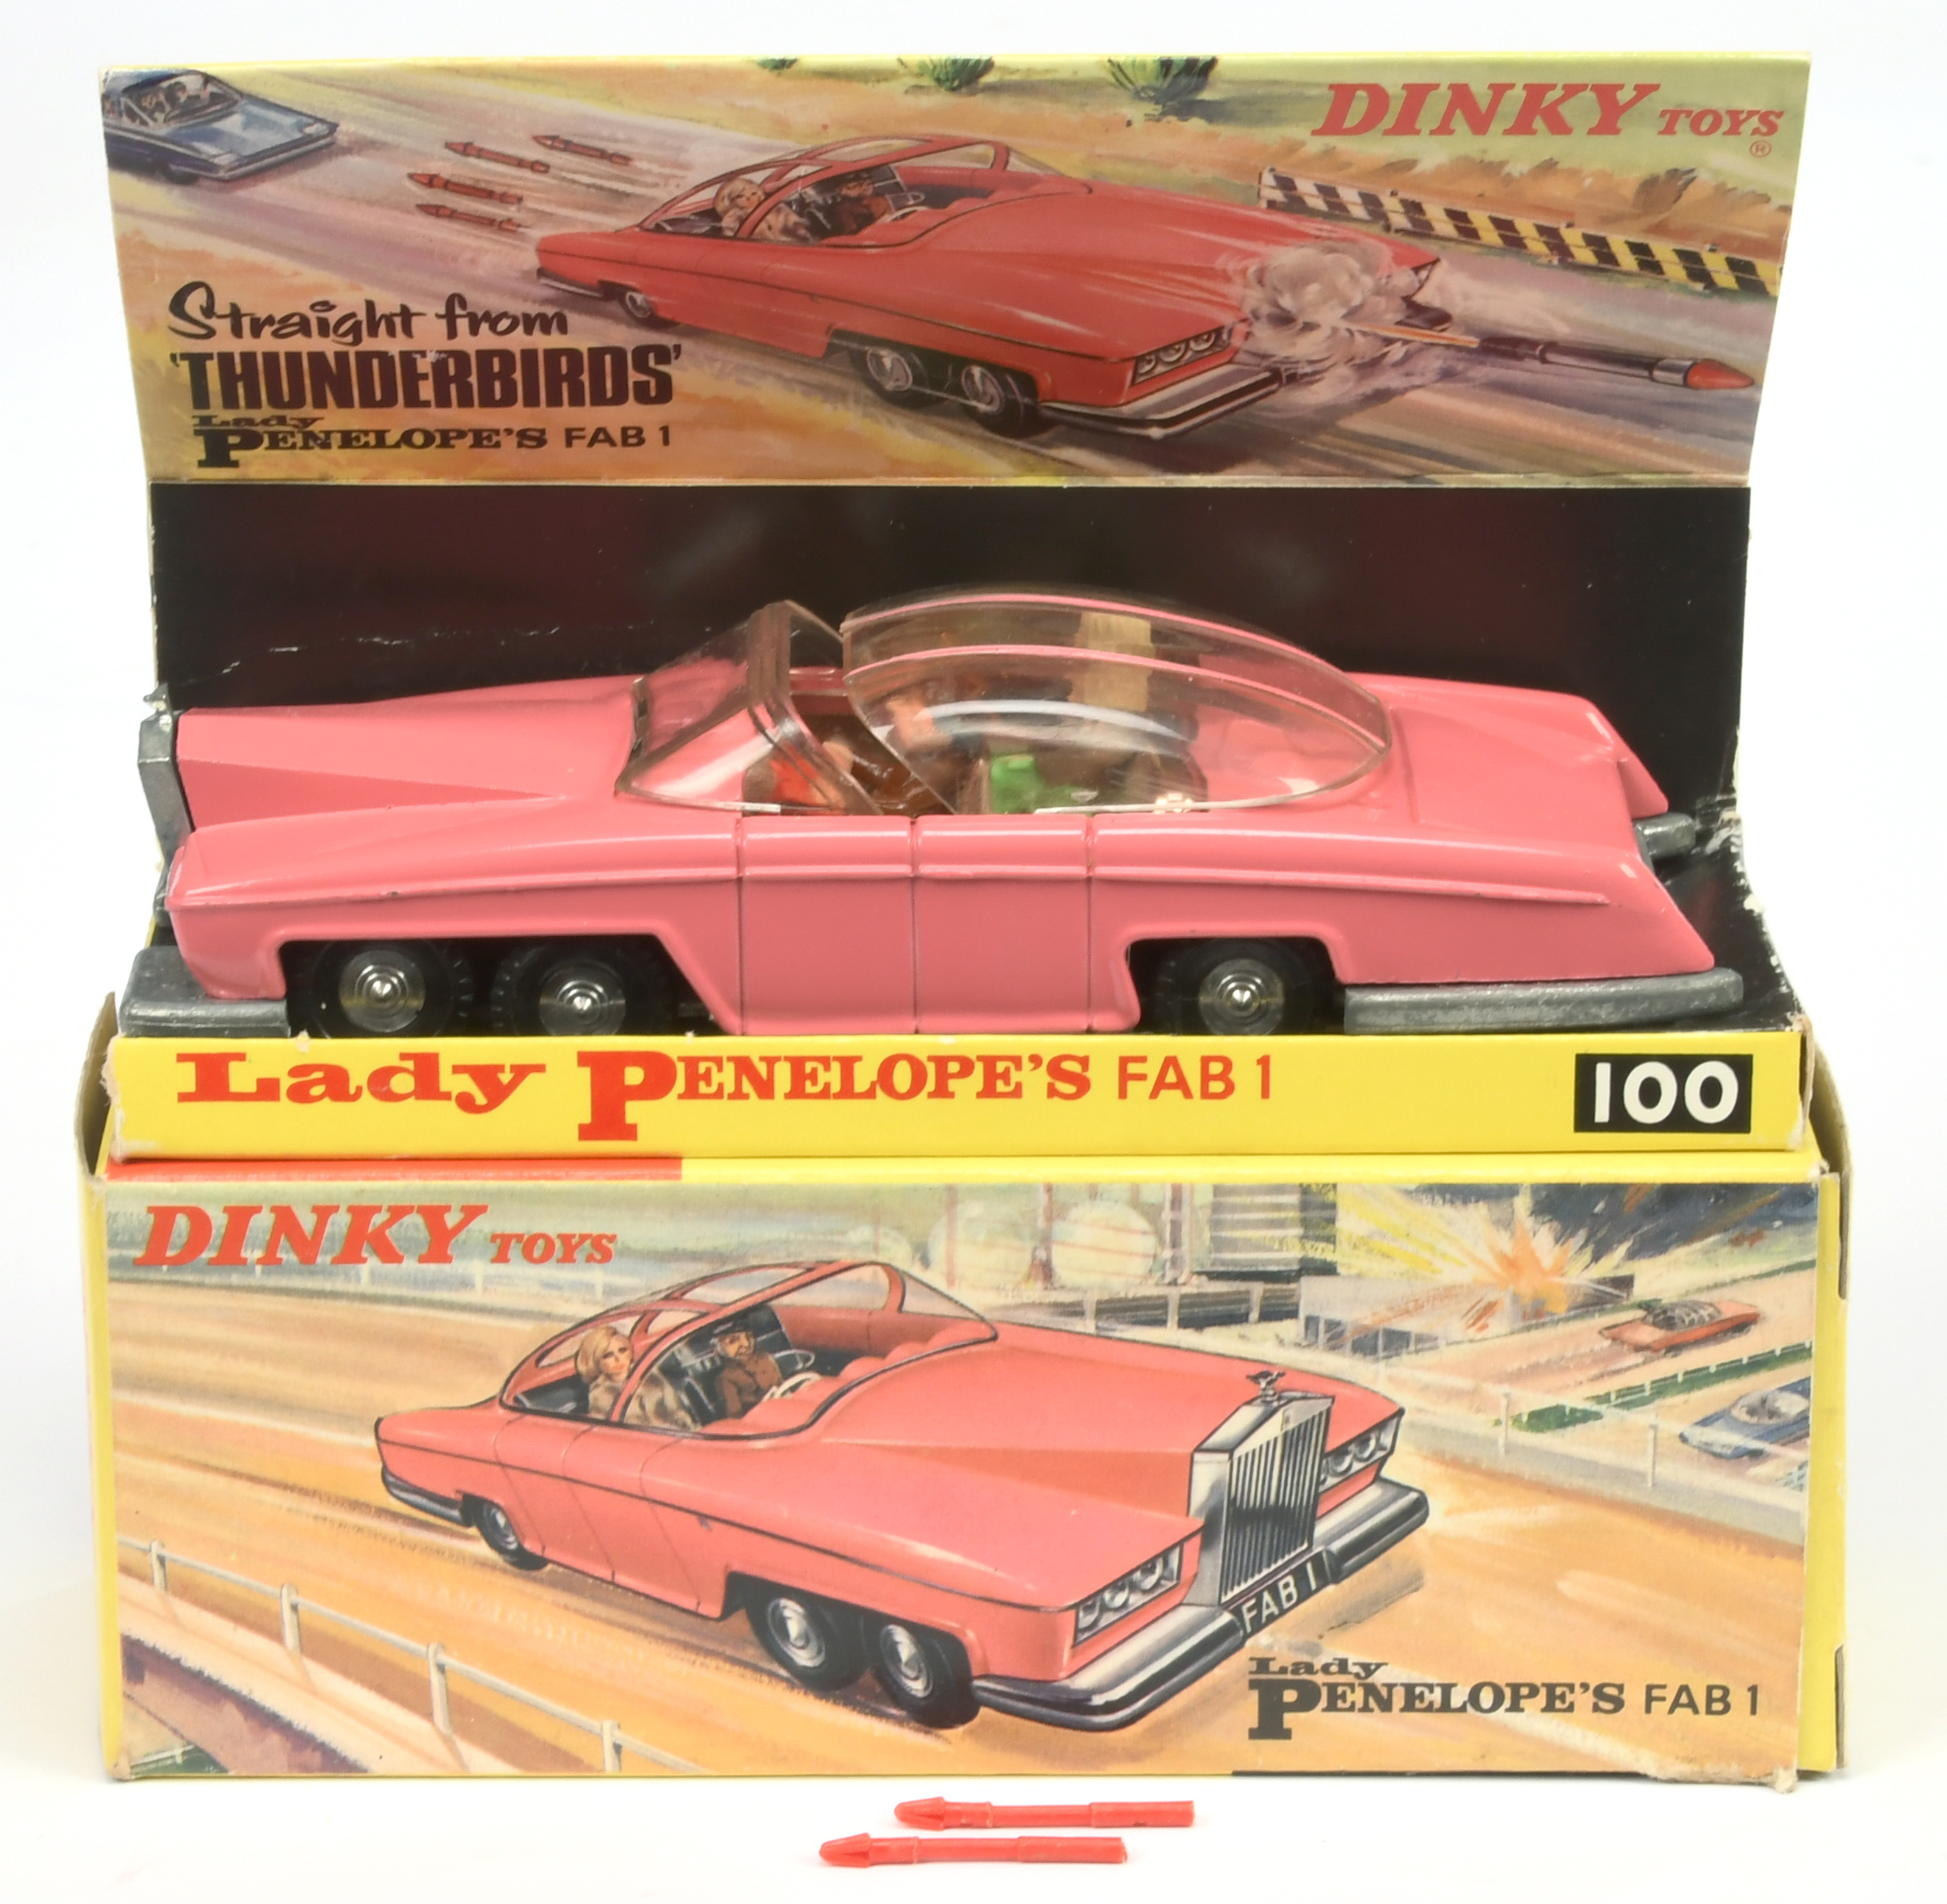 Dinky Toys 100 "Thunderbirds" - Lady Penelope FAB 1 Rolls Royce - Pink including roof slides, gol...